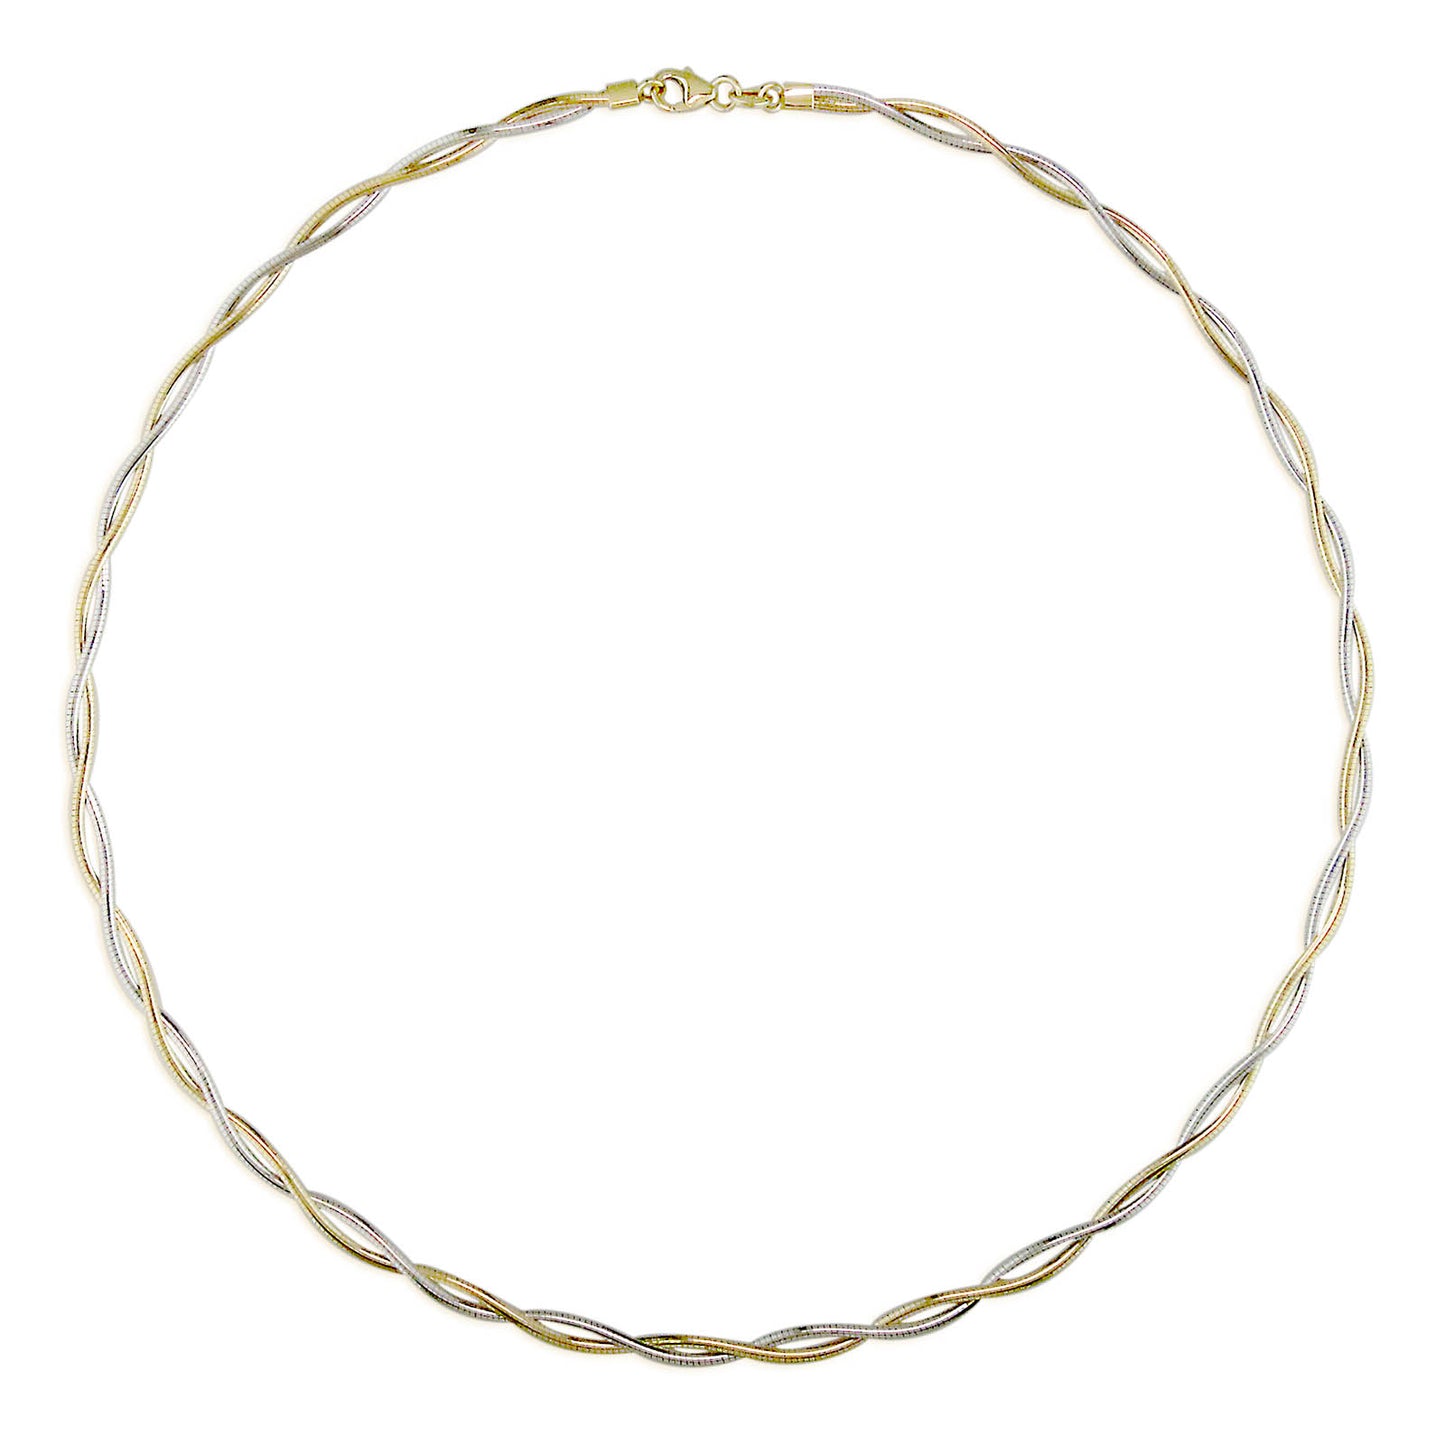 762182 - 14K White Gold and 14K Yellow Gold - Twisted Omega Necklace